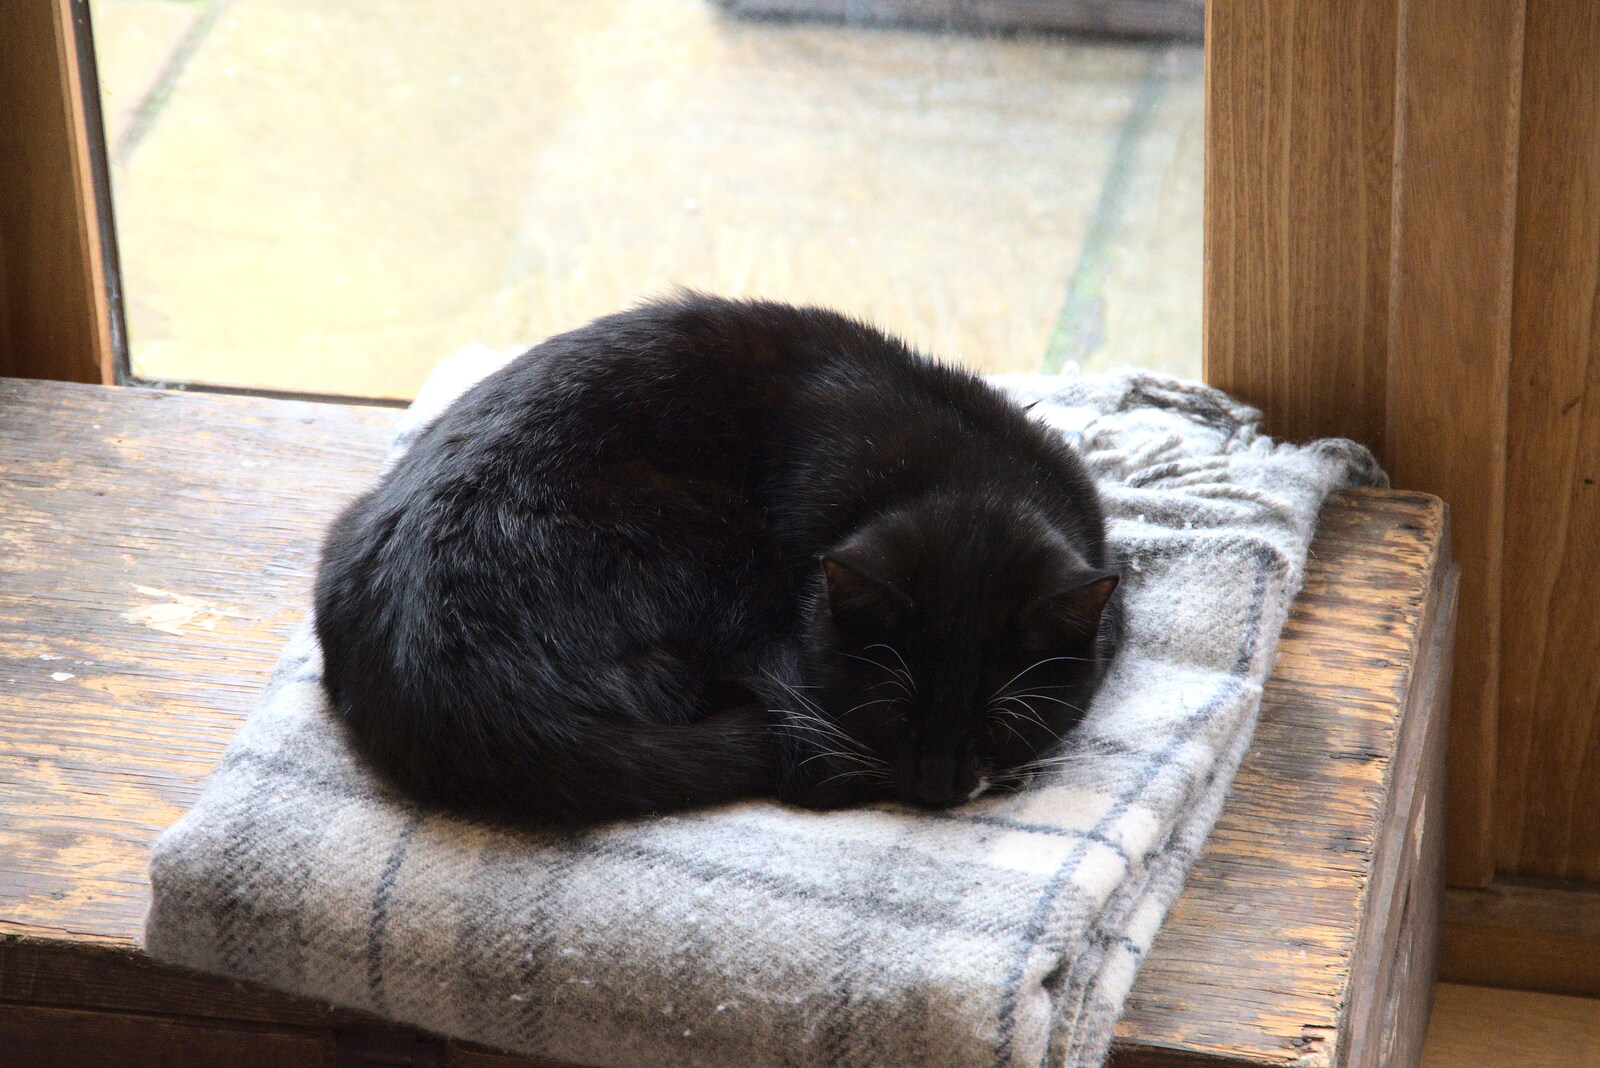 Lucy - Lunatic Kitten - has a sleep from New Year's Day, Brome, Suffolk - 1st January 2022